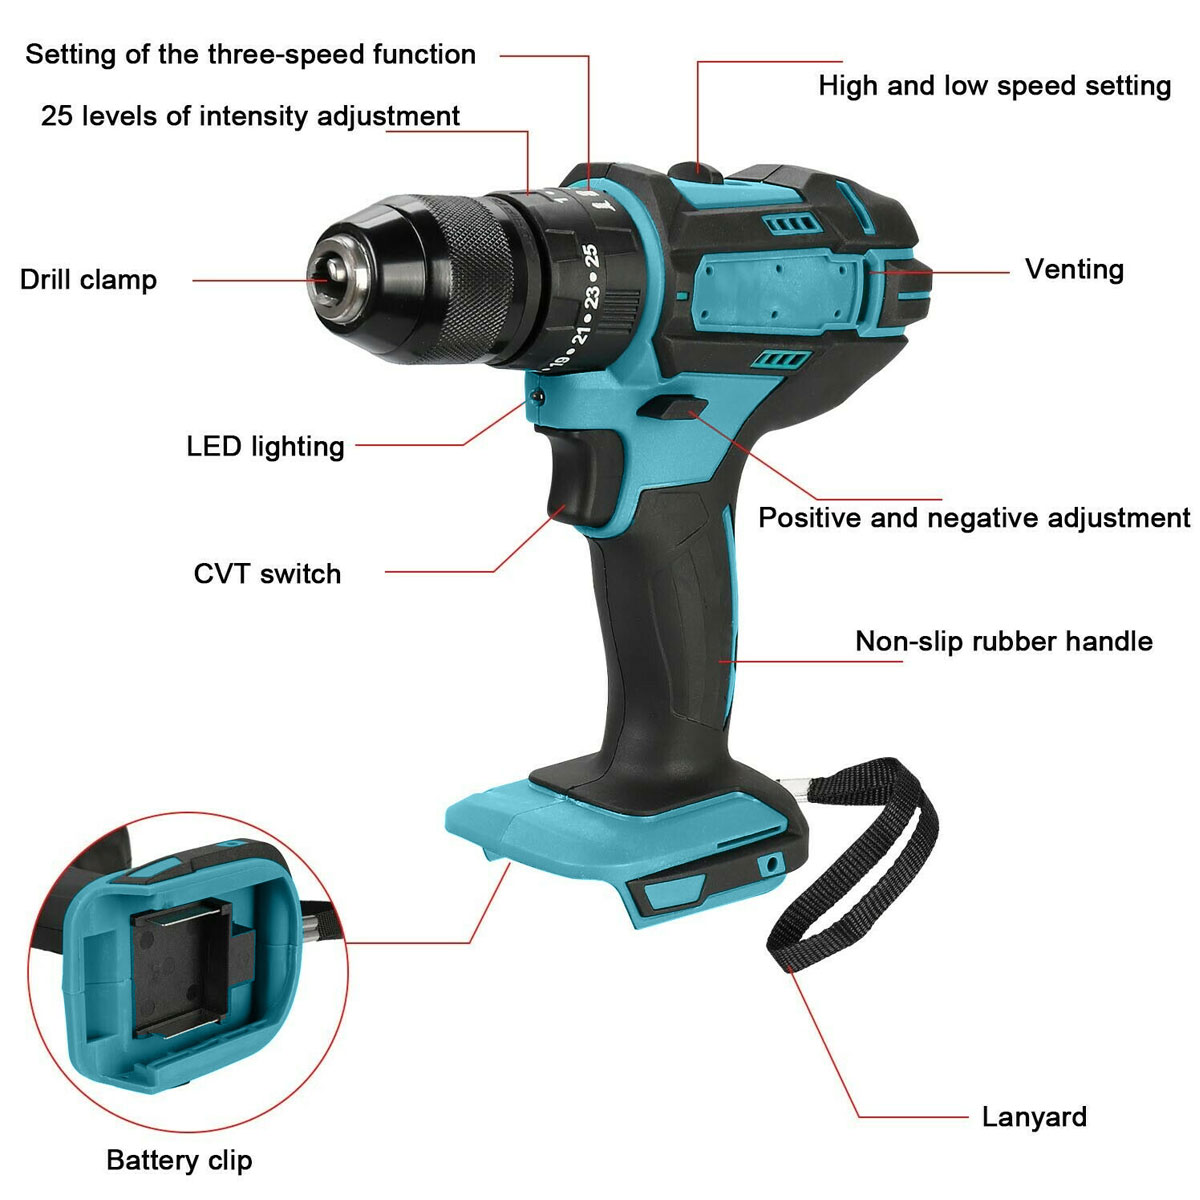 13mm-800W-Cordless-Brushless-Impact-Drill-Driver-253-Torque-Electric-Drill-Screwdriver-For-Makita-18-1880979-11